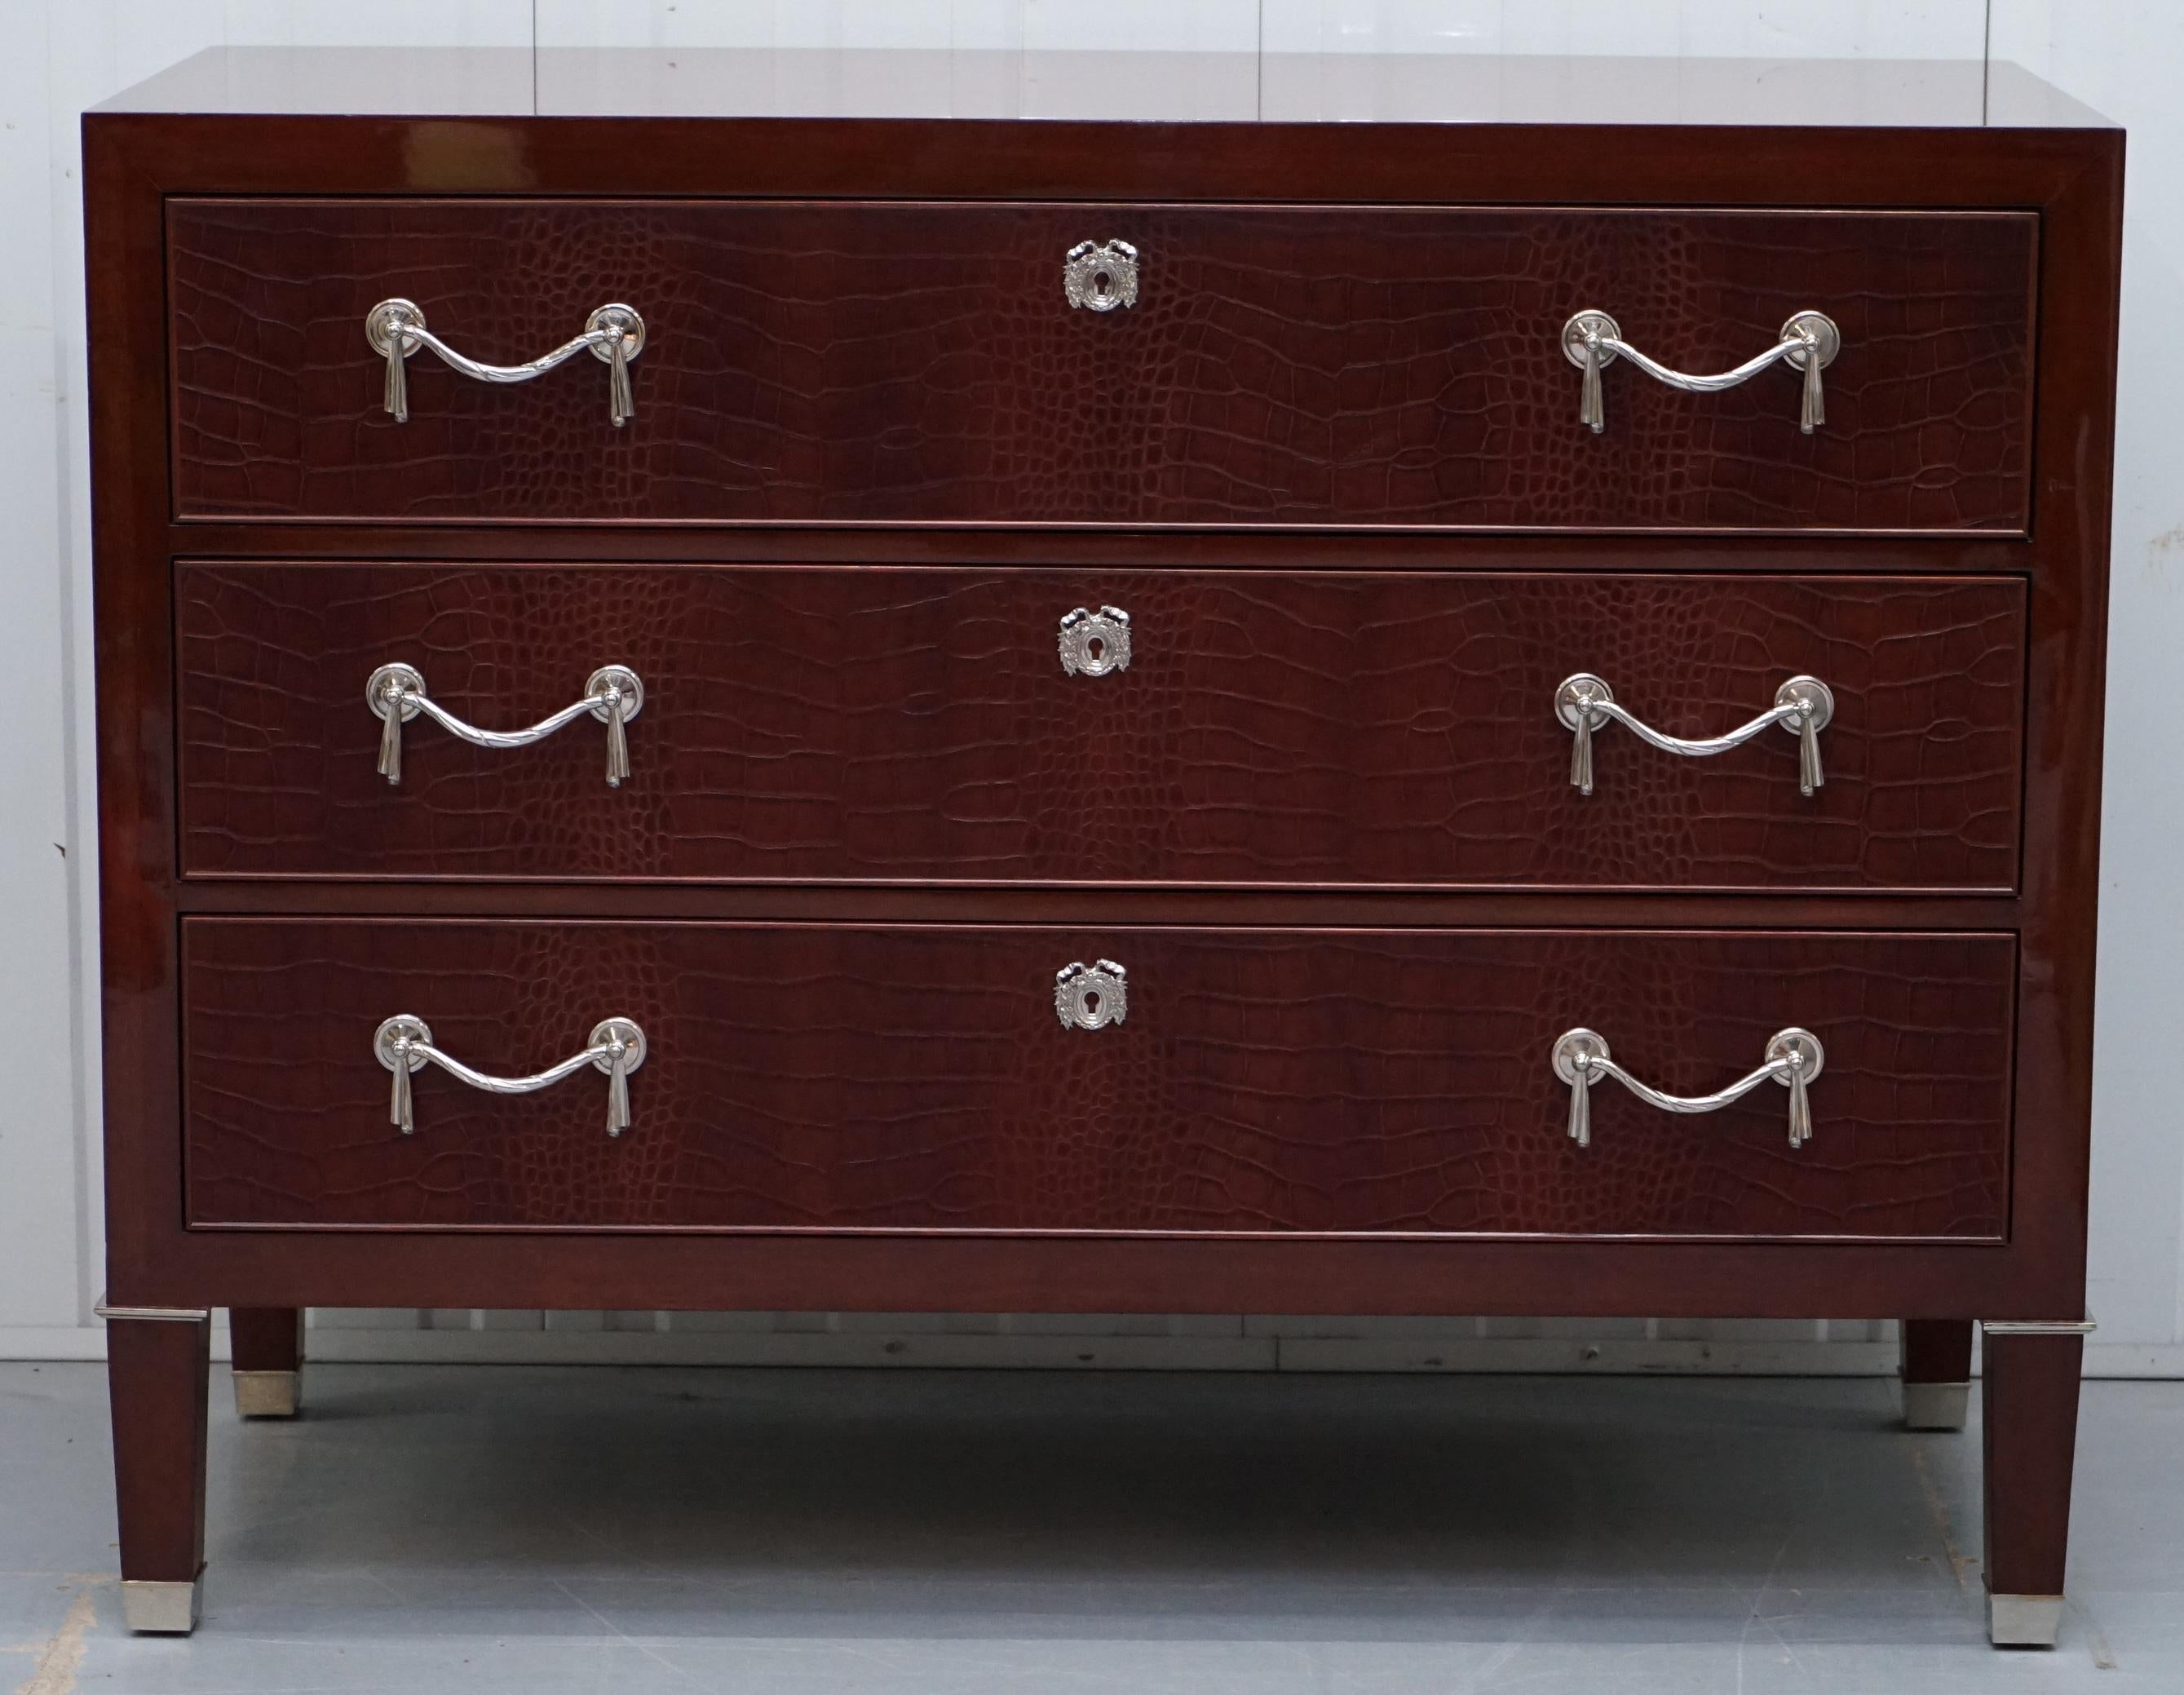 We are delighted to offer for sale this brand new with original tags Ralph Lauren Brook Street chest of drawers with brown leather Alligator/crocodile patina leather panelling RRP £12,000

The drawers are ex-shop display, I have bought around 30